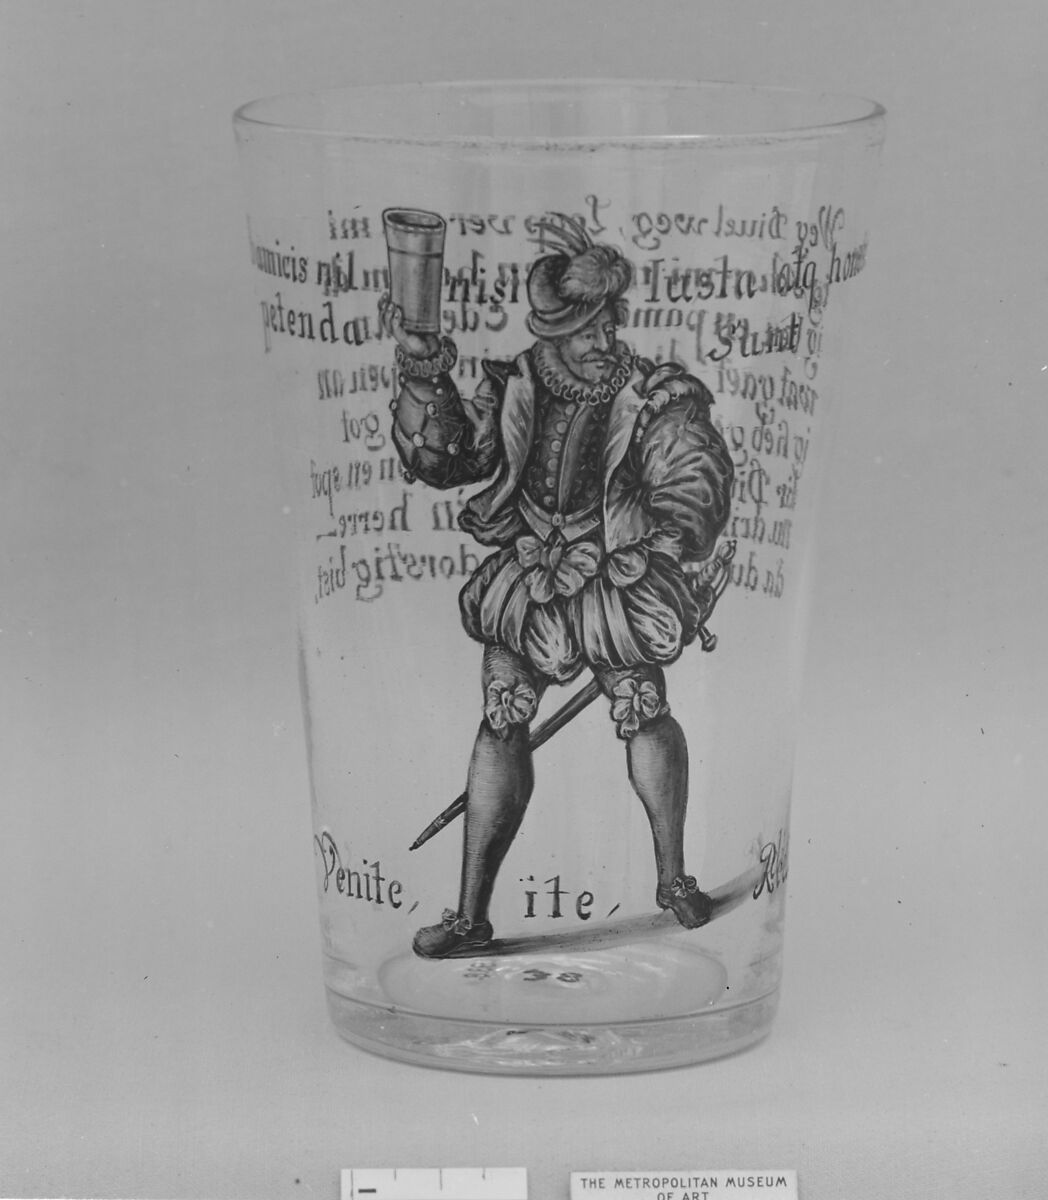 Beaker, Possibly decorated by J. G. Bühler (German, active early 19th century), Glass, German 